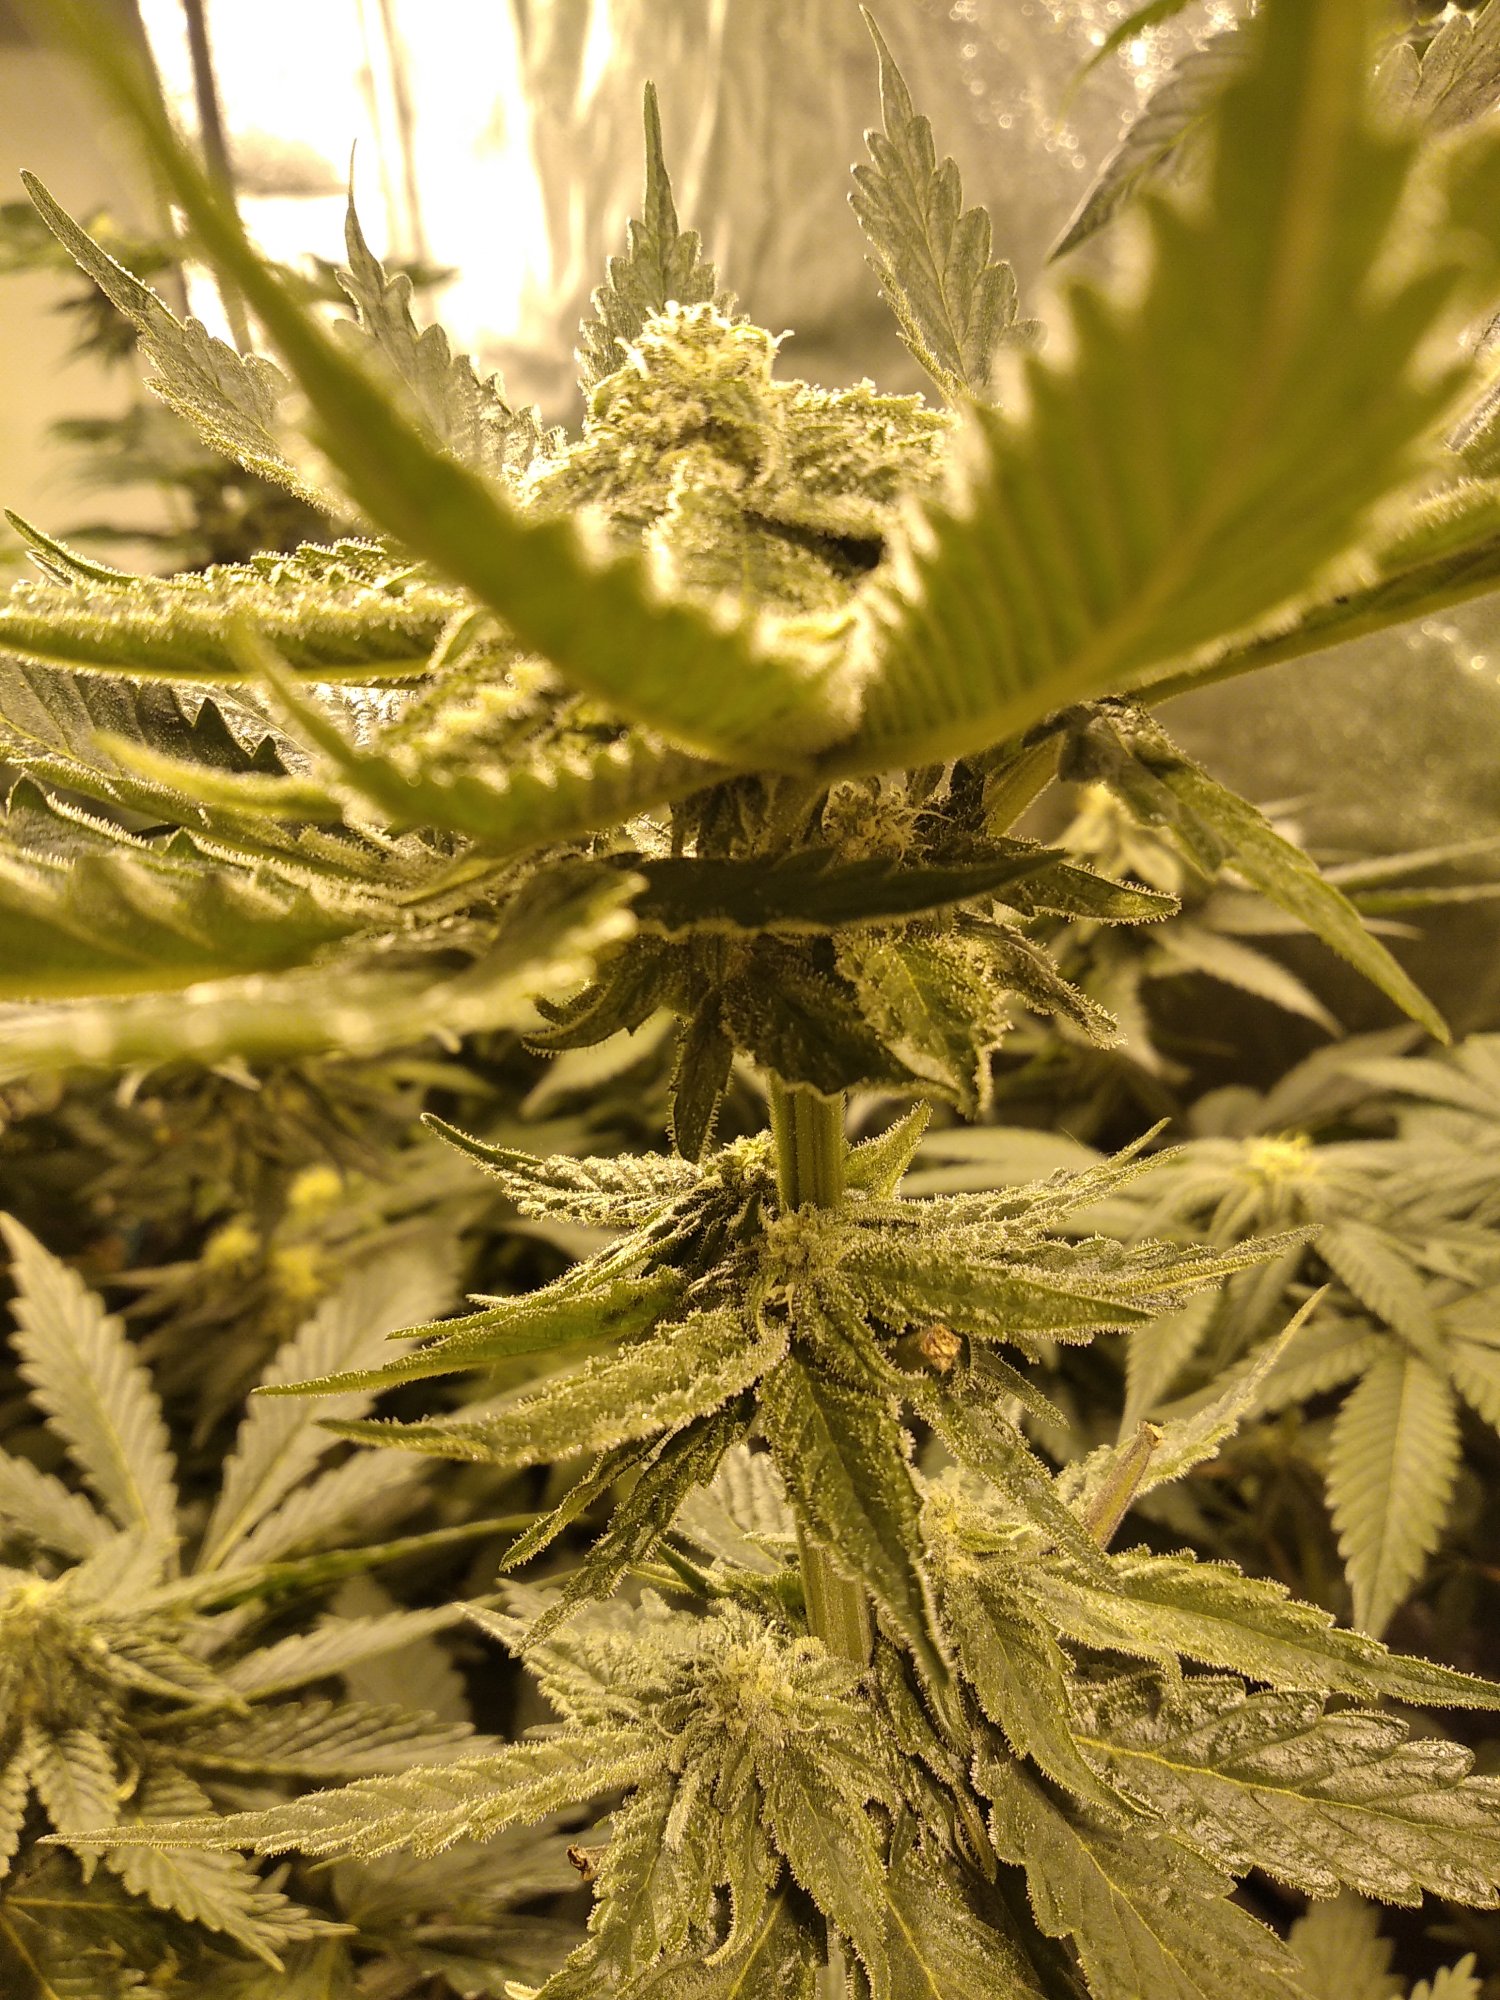 Help me the buds dont devolpement correctly